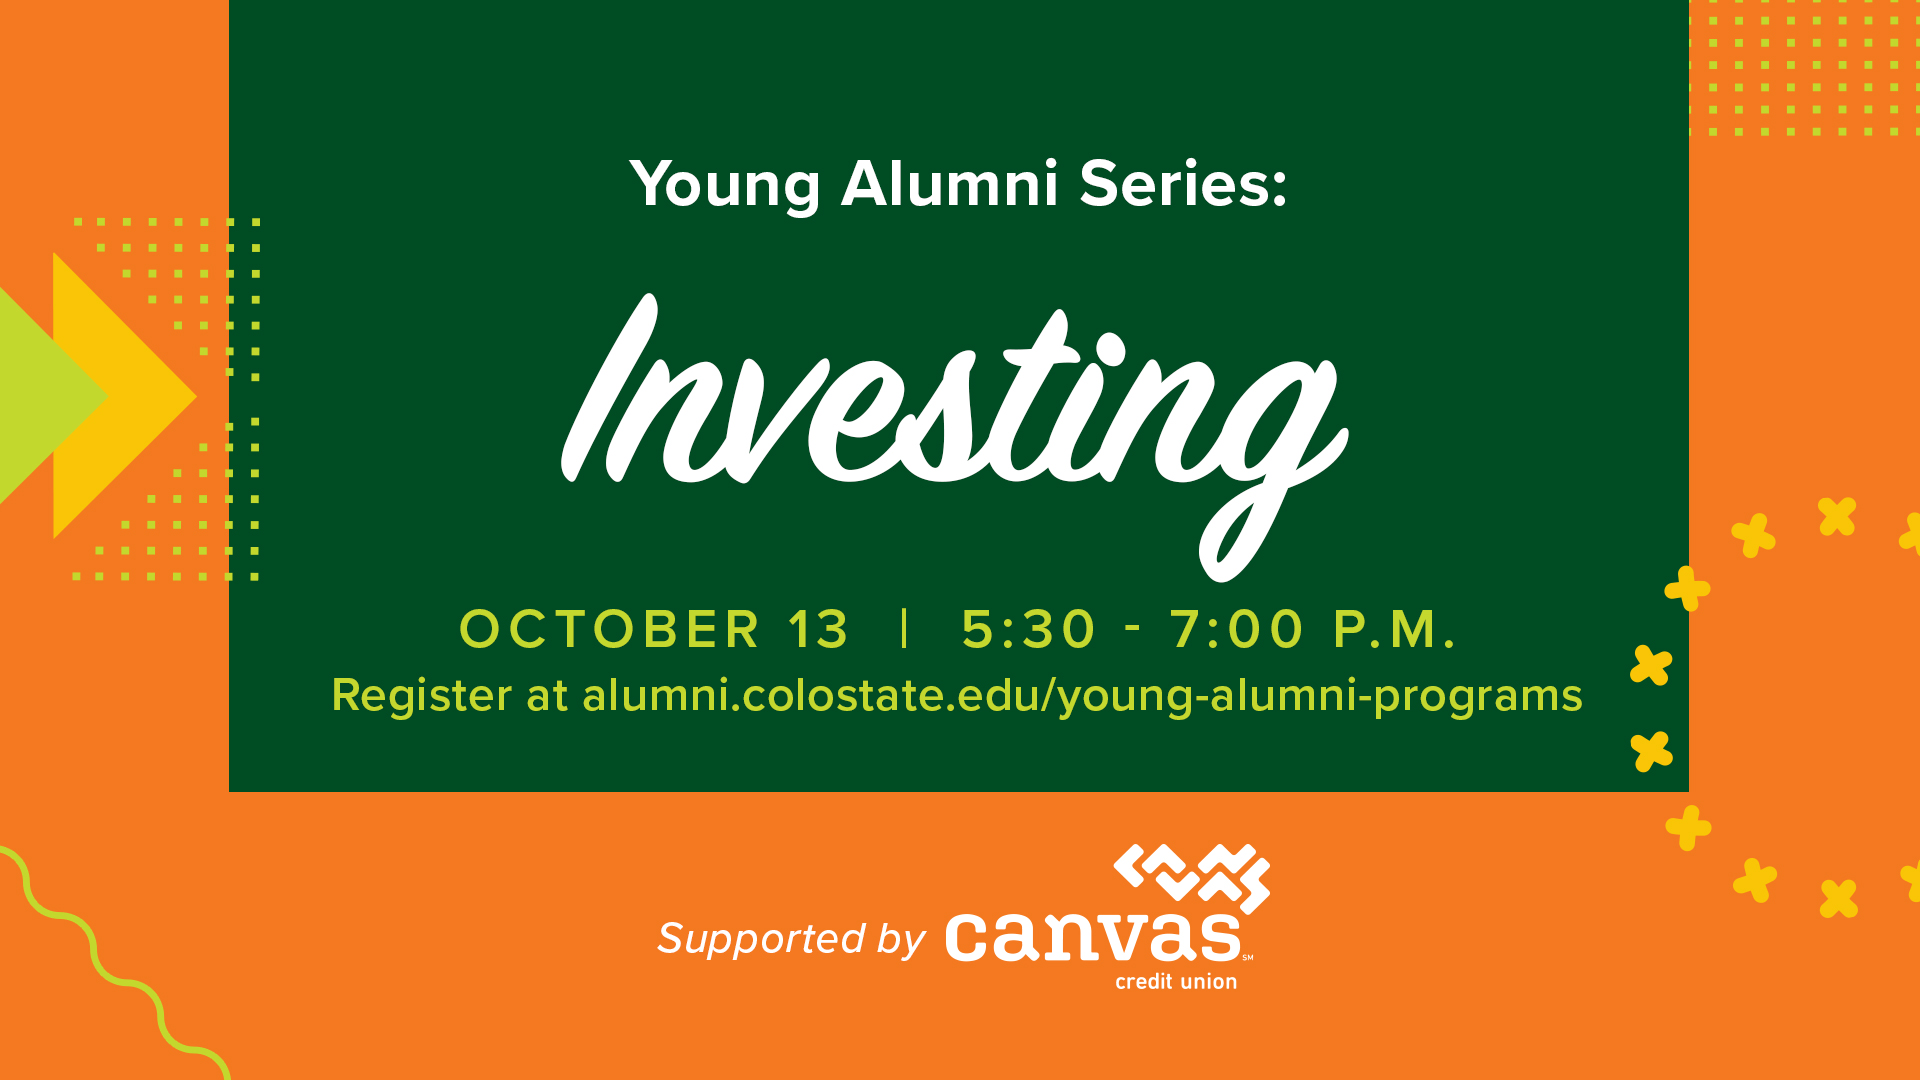 Image for Young Alumni Series: Investing webinar